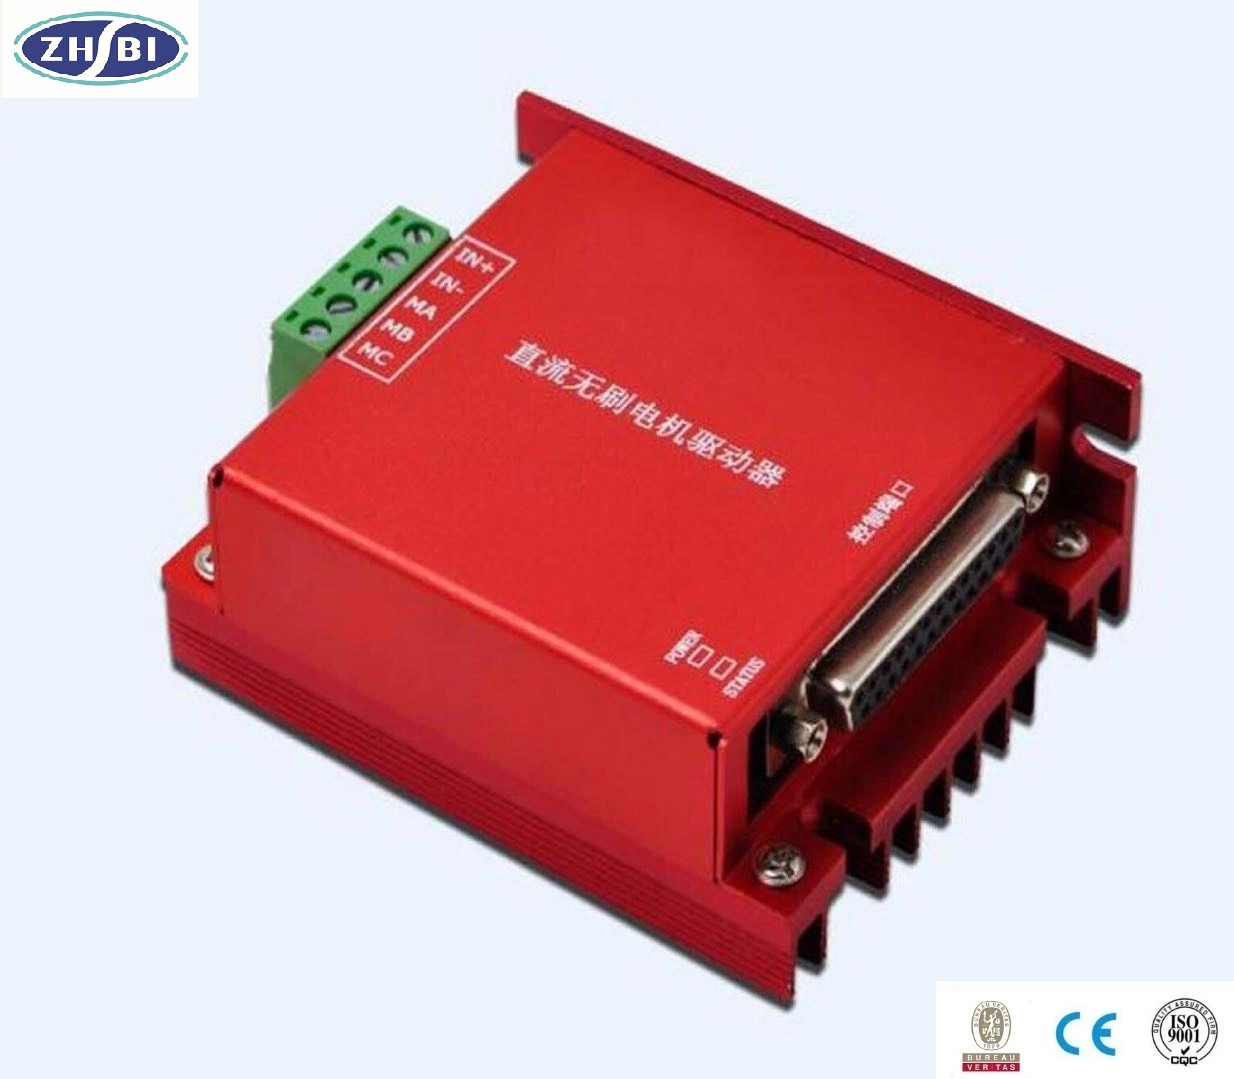 High Performance PWM Control Position Mode 30A Motor Speed Controller 24V 300W 48V 500W Brushless DC Motor Controller